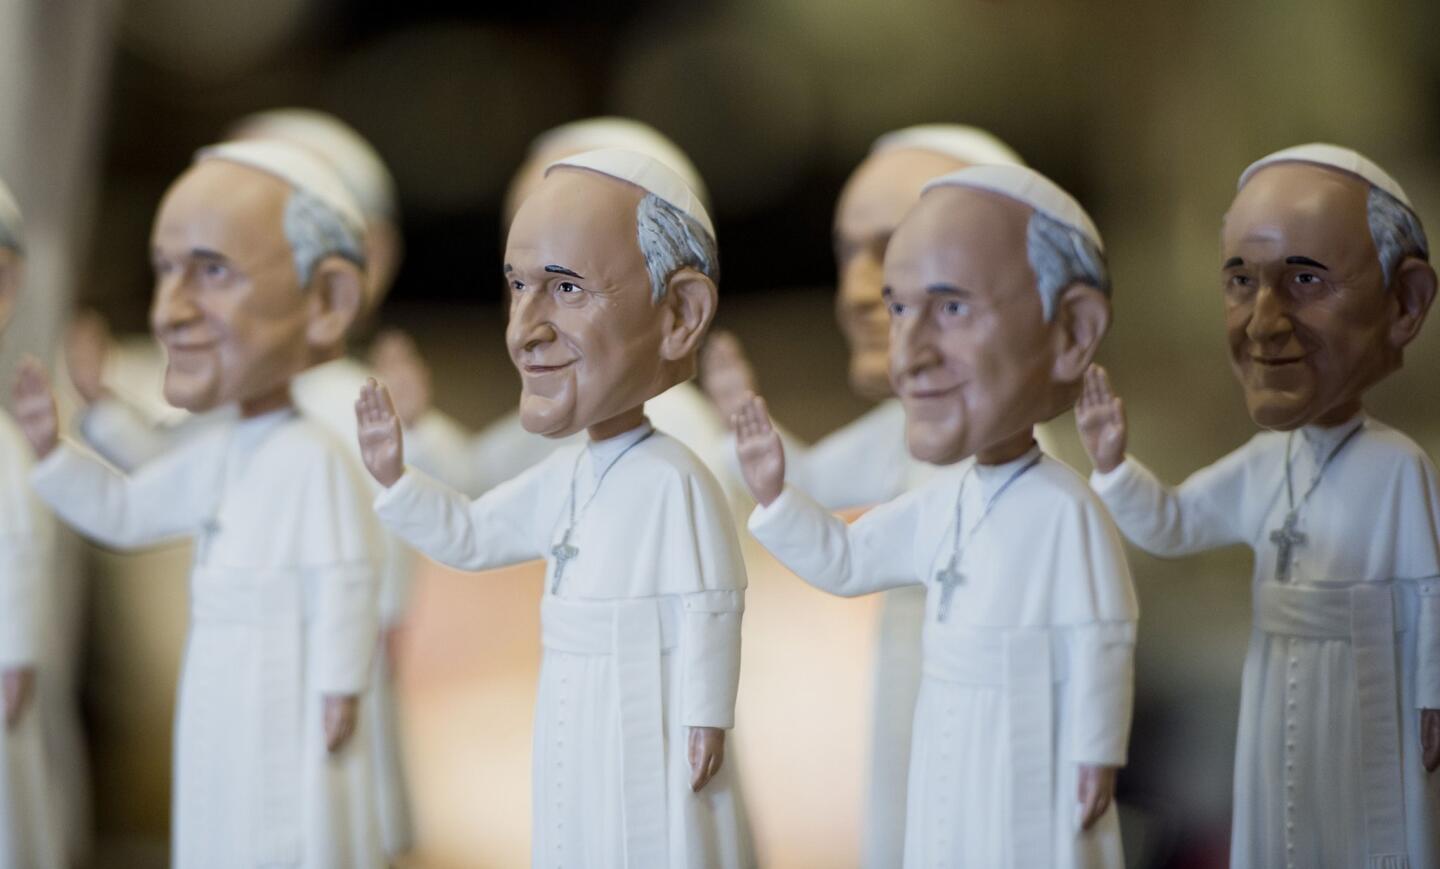 Pope Francis bobble-head dolls are displayed at a souvenir store in Washington.